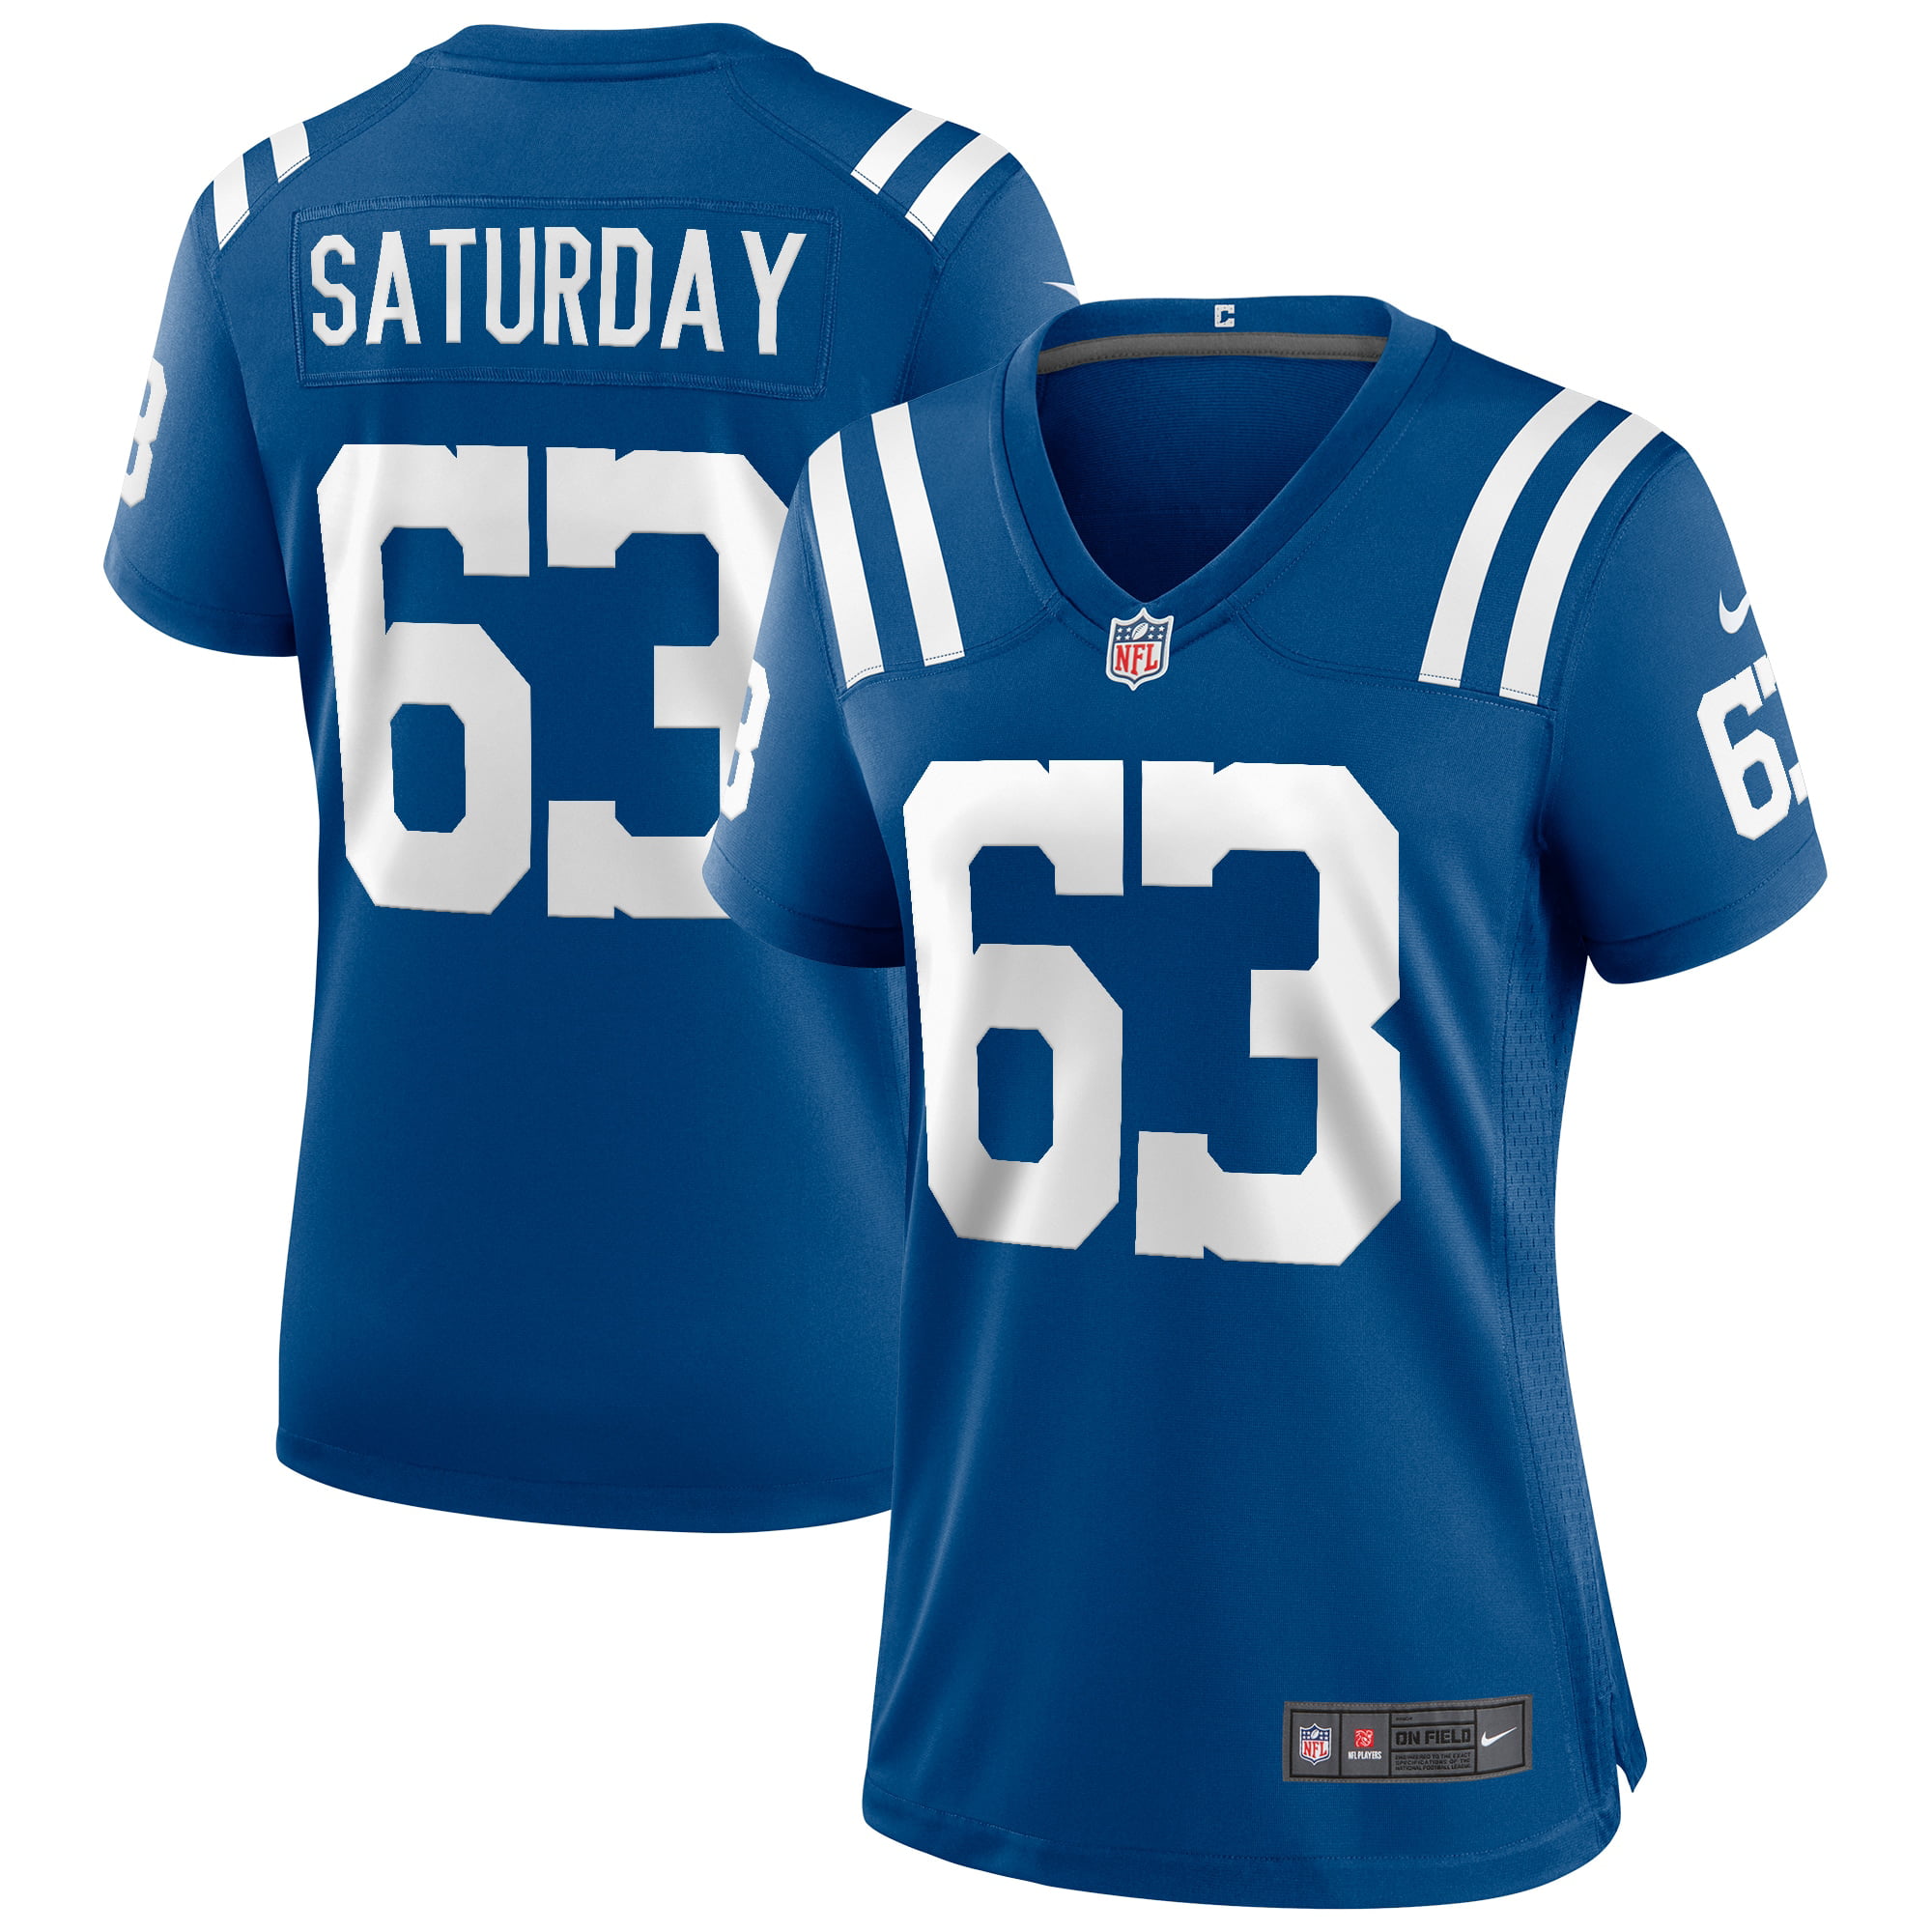 Jeff Saturday Indianapolis Colts Nike Women's Game Retired Player Jersey - Royal - Walmart.com